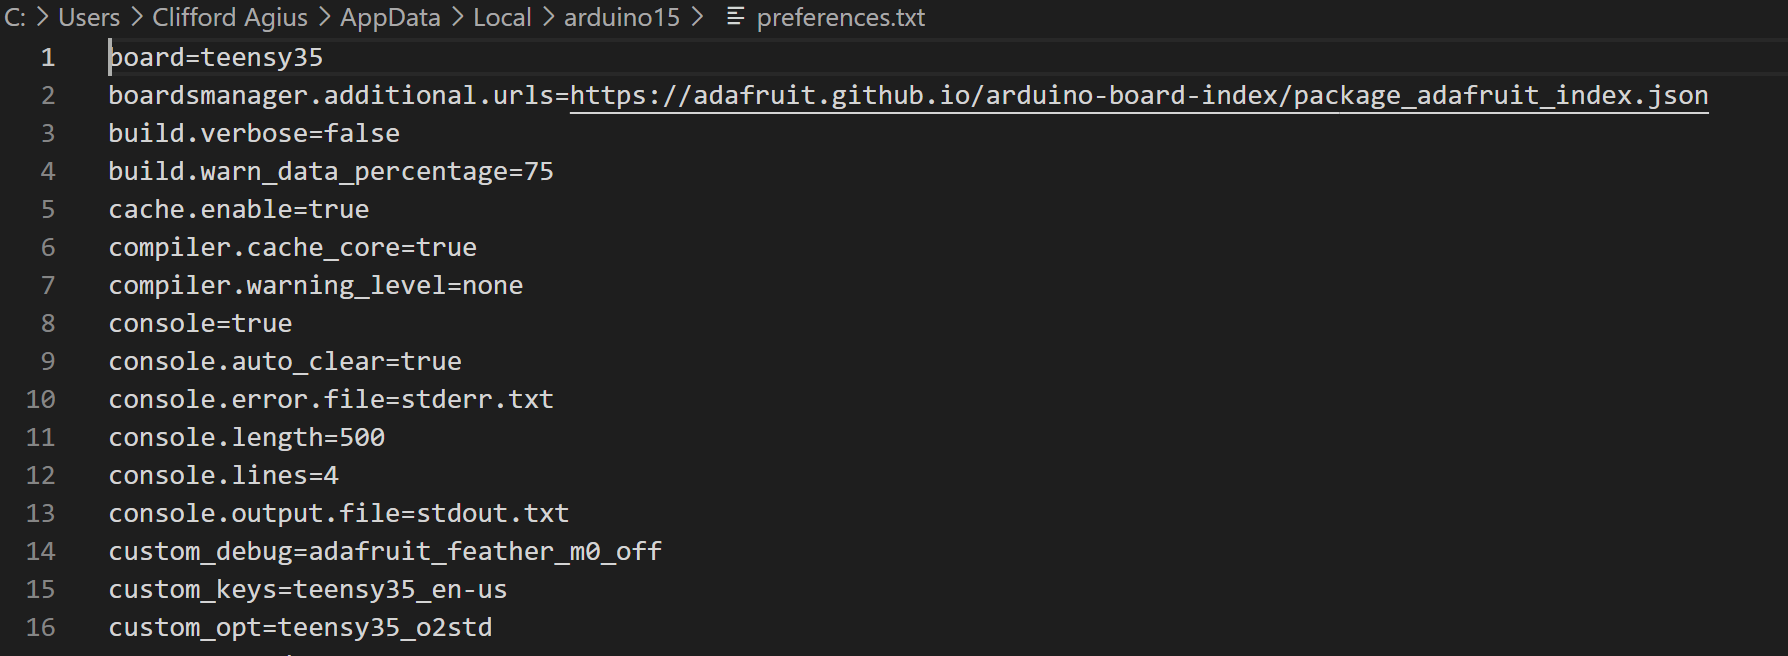 Preferences.txt file contents open in VSCode